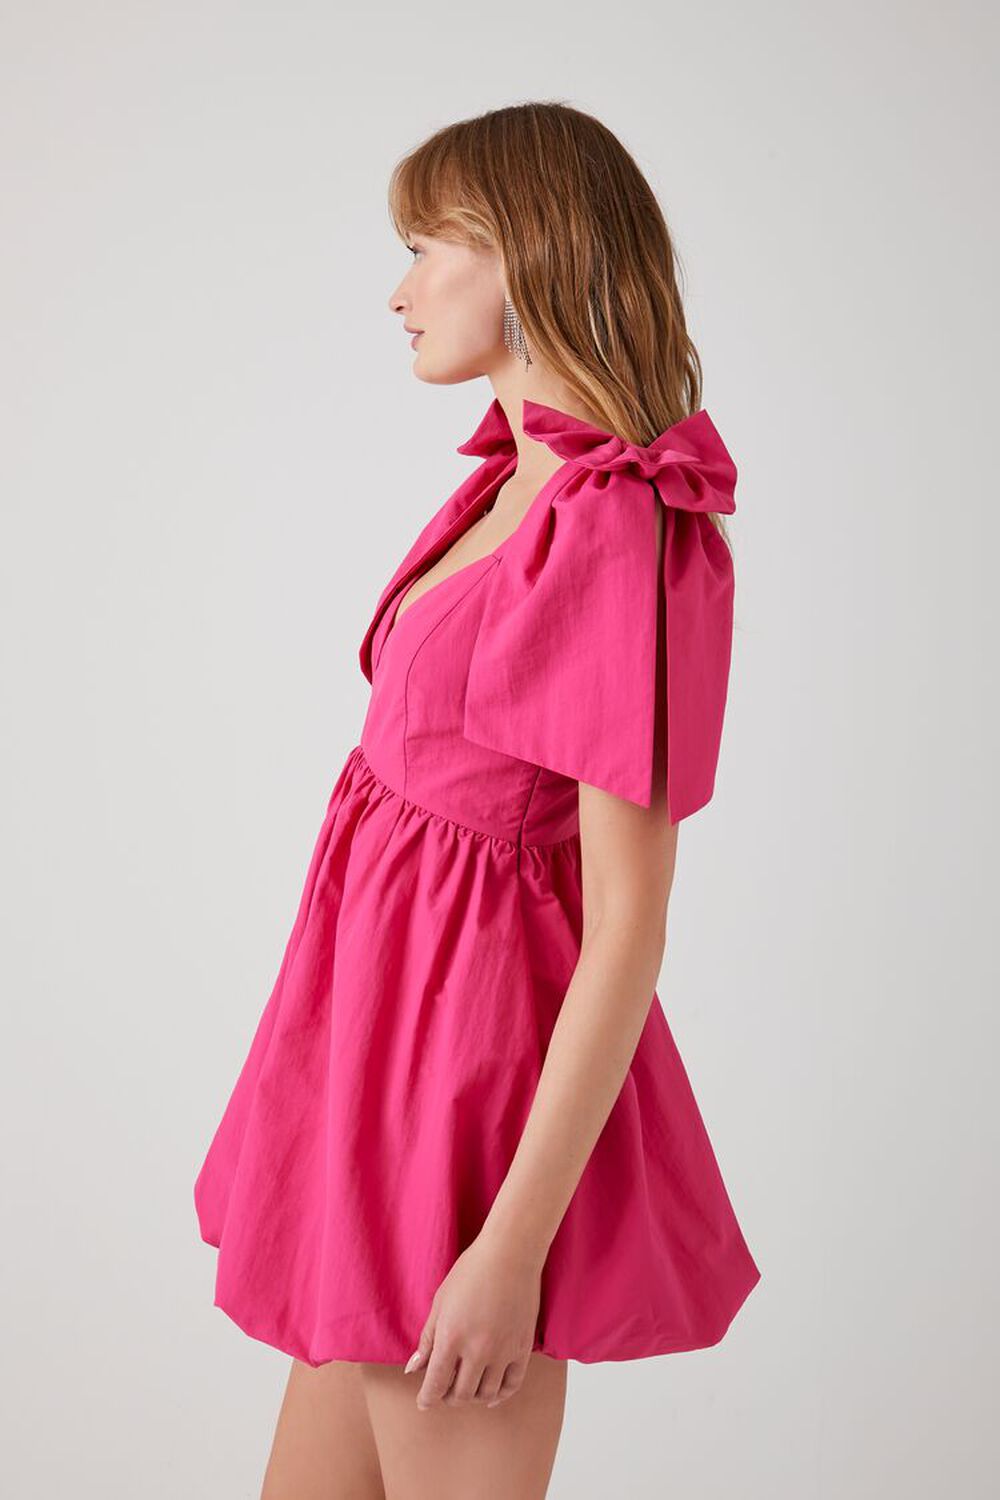 HIBISCUS Plunging Bow Babydoll Dress, image 3